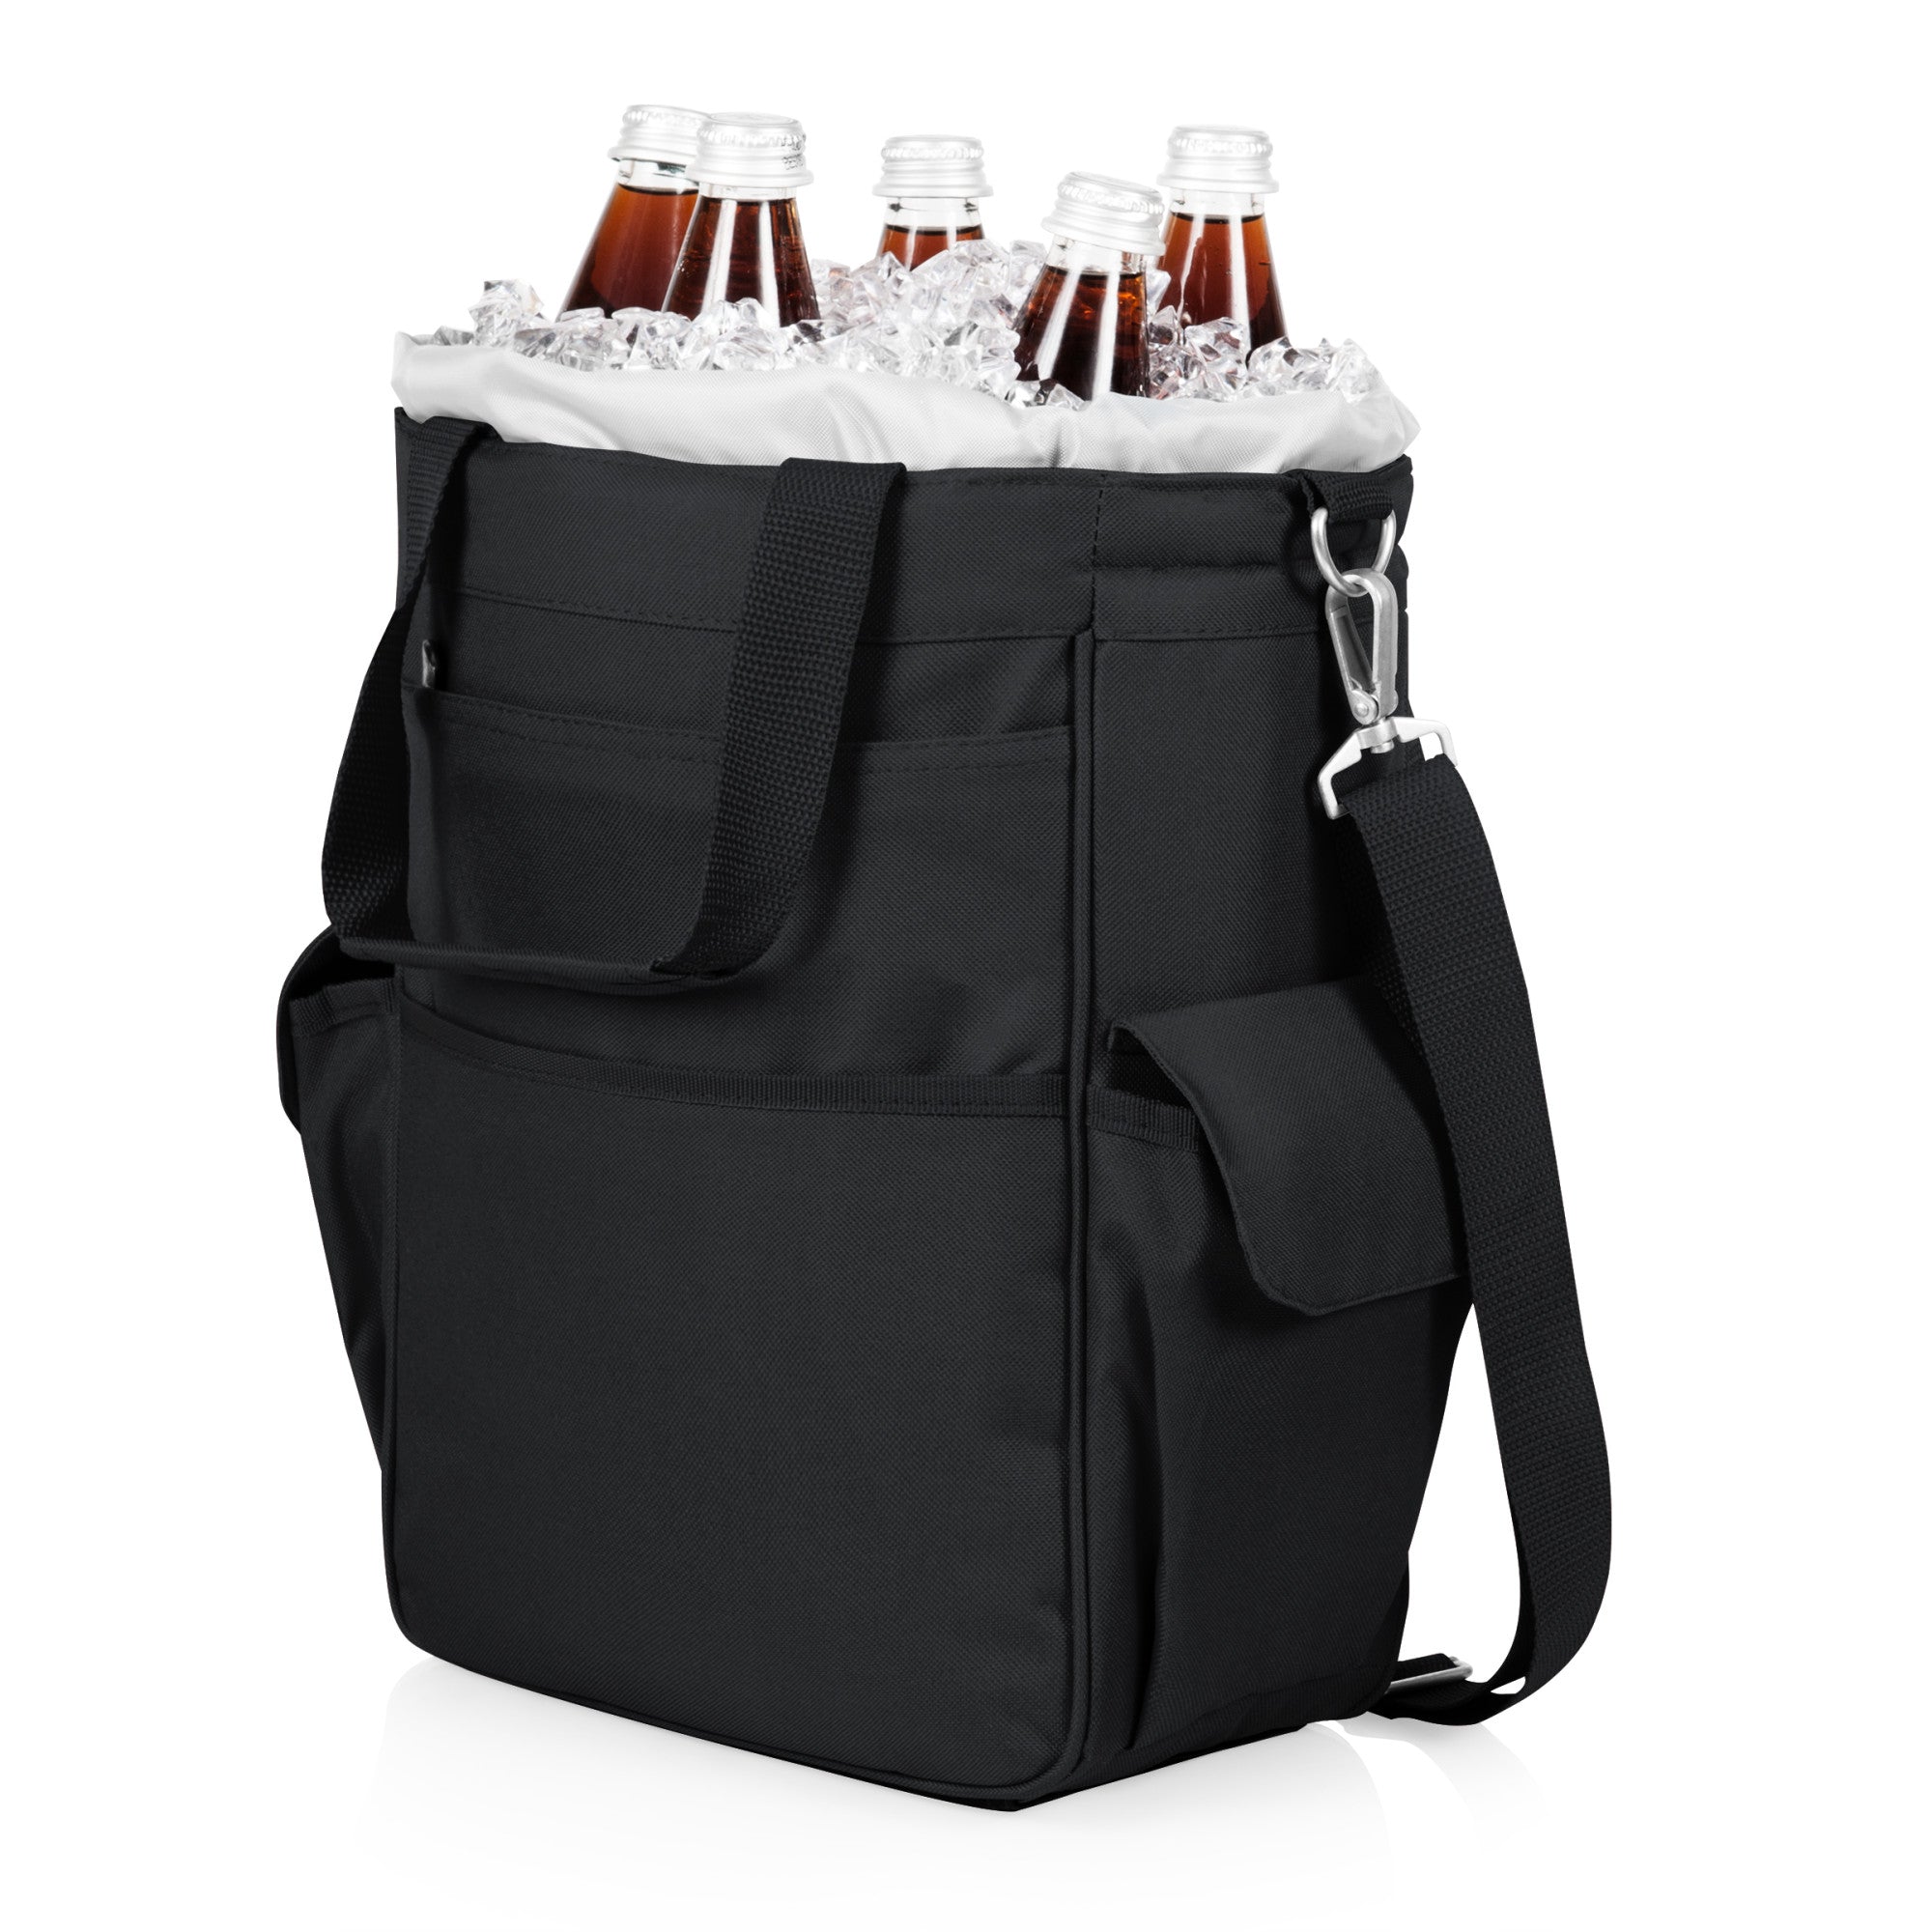 Activo Cooler Tote Bag – PICNIC TIME FAMILY OF BRANDS